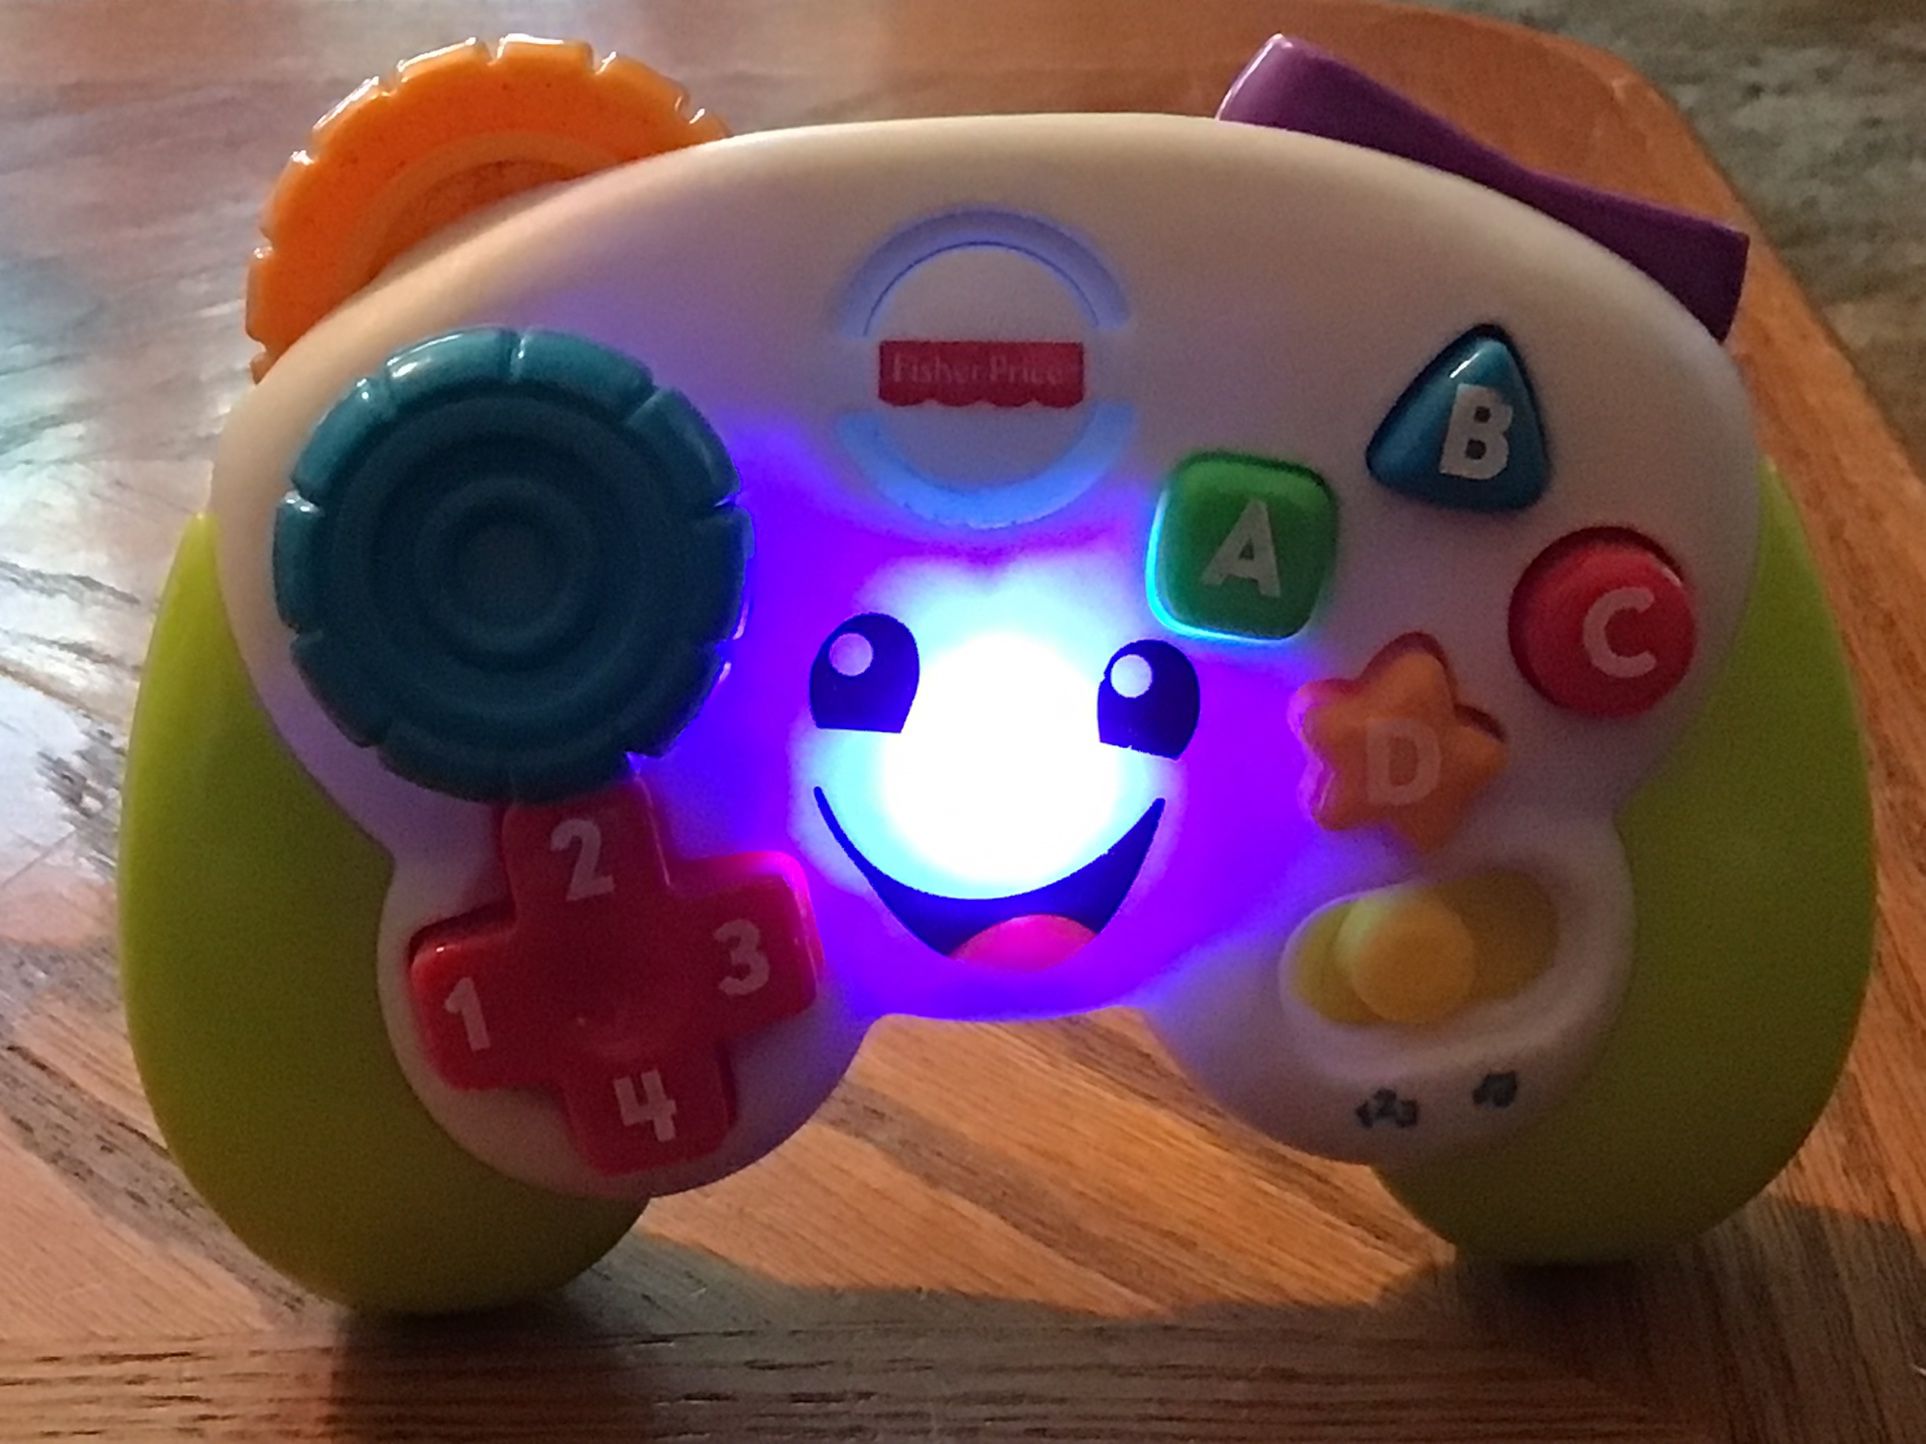 Fisher-Price Laugh & Learn Colorful Game & Learn Controller